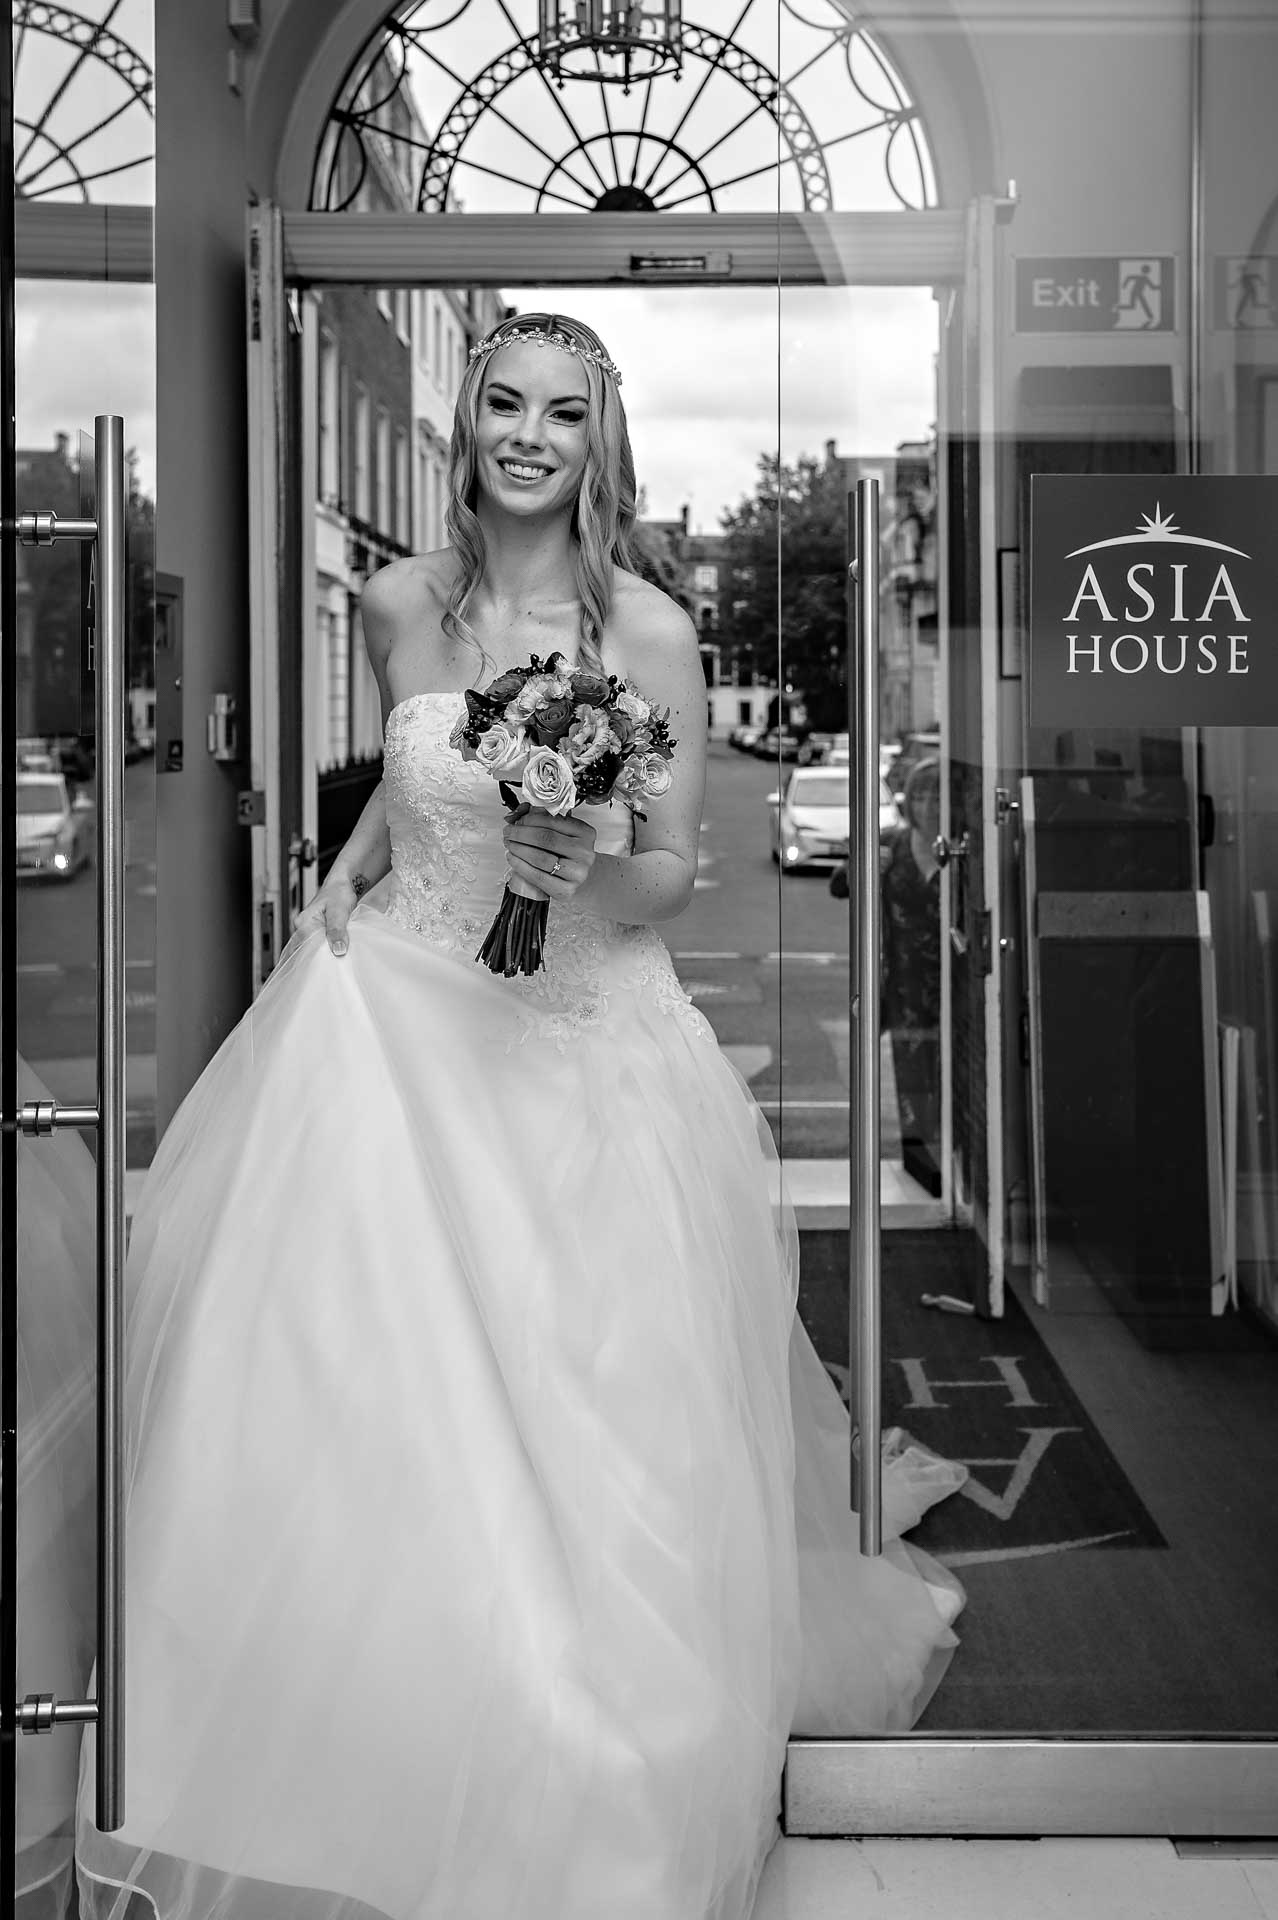 Bride Arriving at Asia House Wedding in White Dress